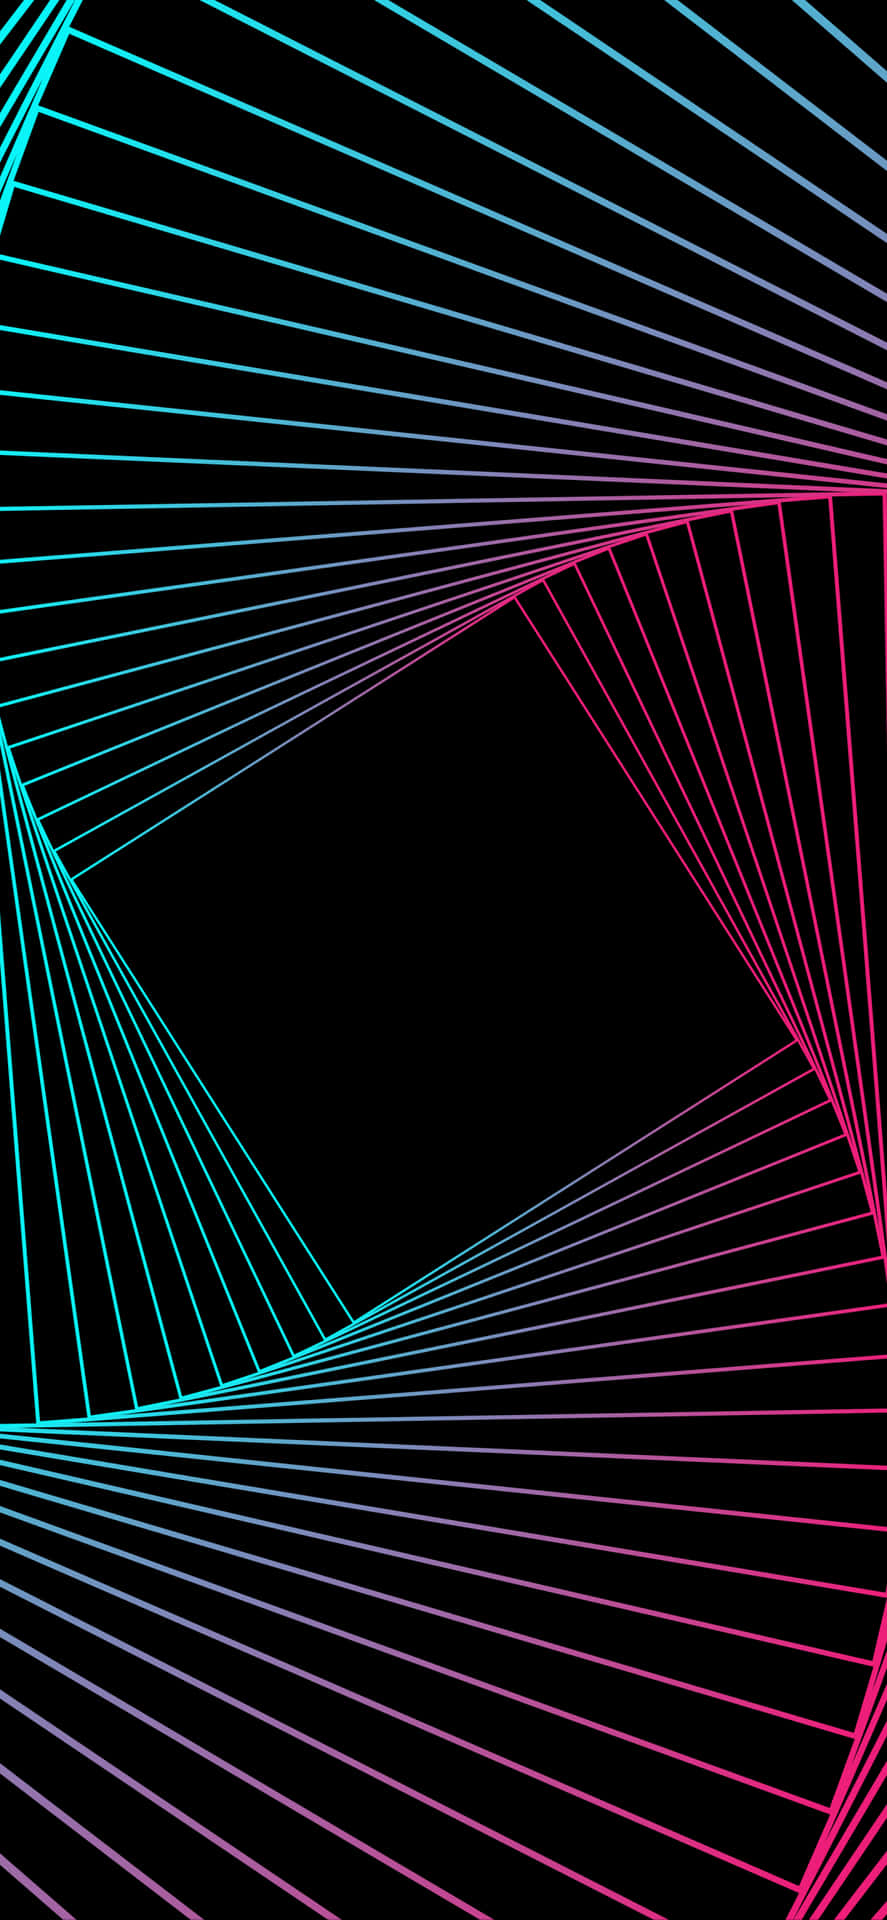 Geometric shapes come to life with the newest Iphone Wallpaper